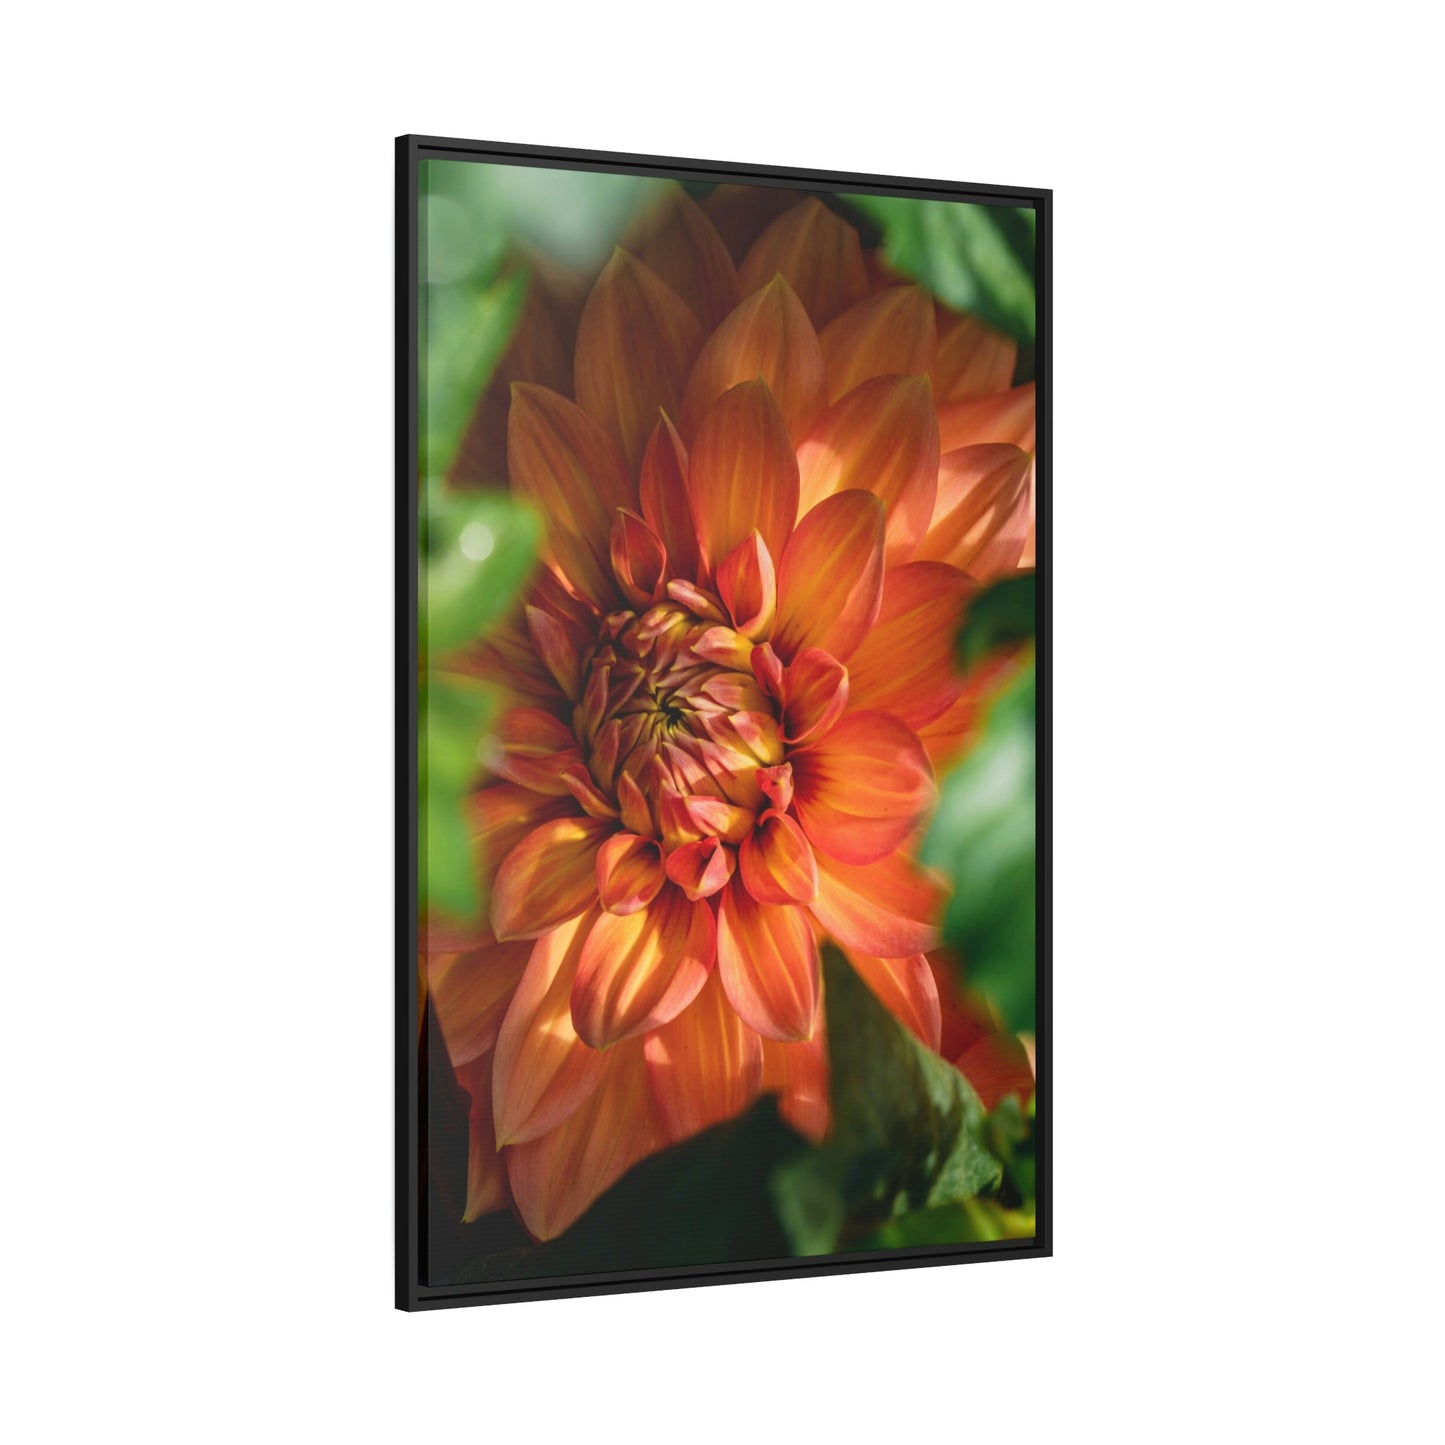 The Majesty of Dahlias: A Wall Art Print of These Gorgeous Blooms